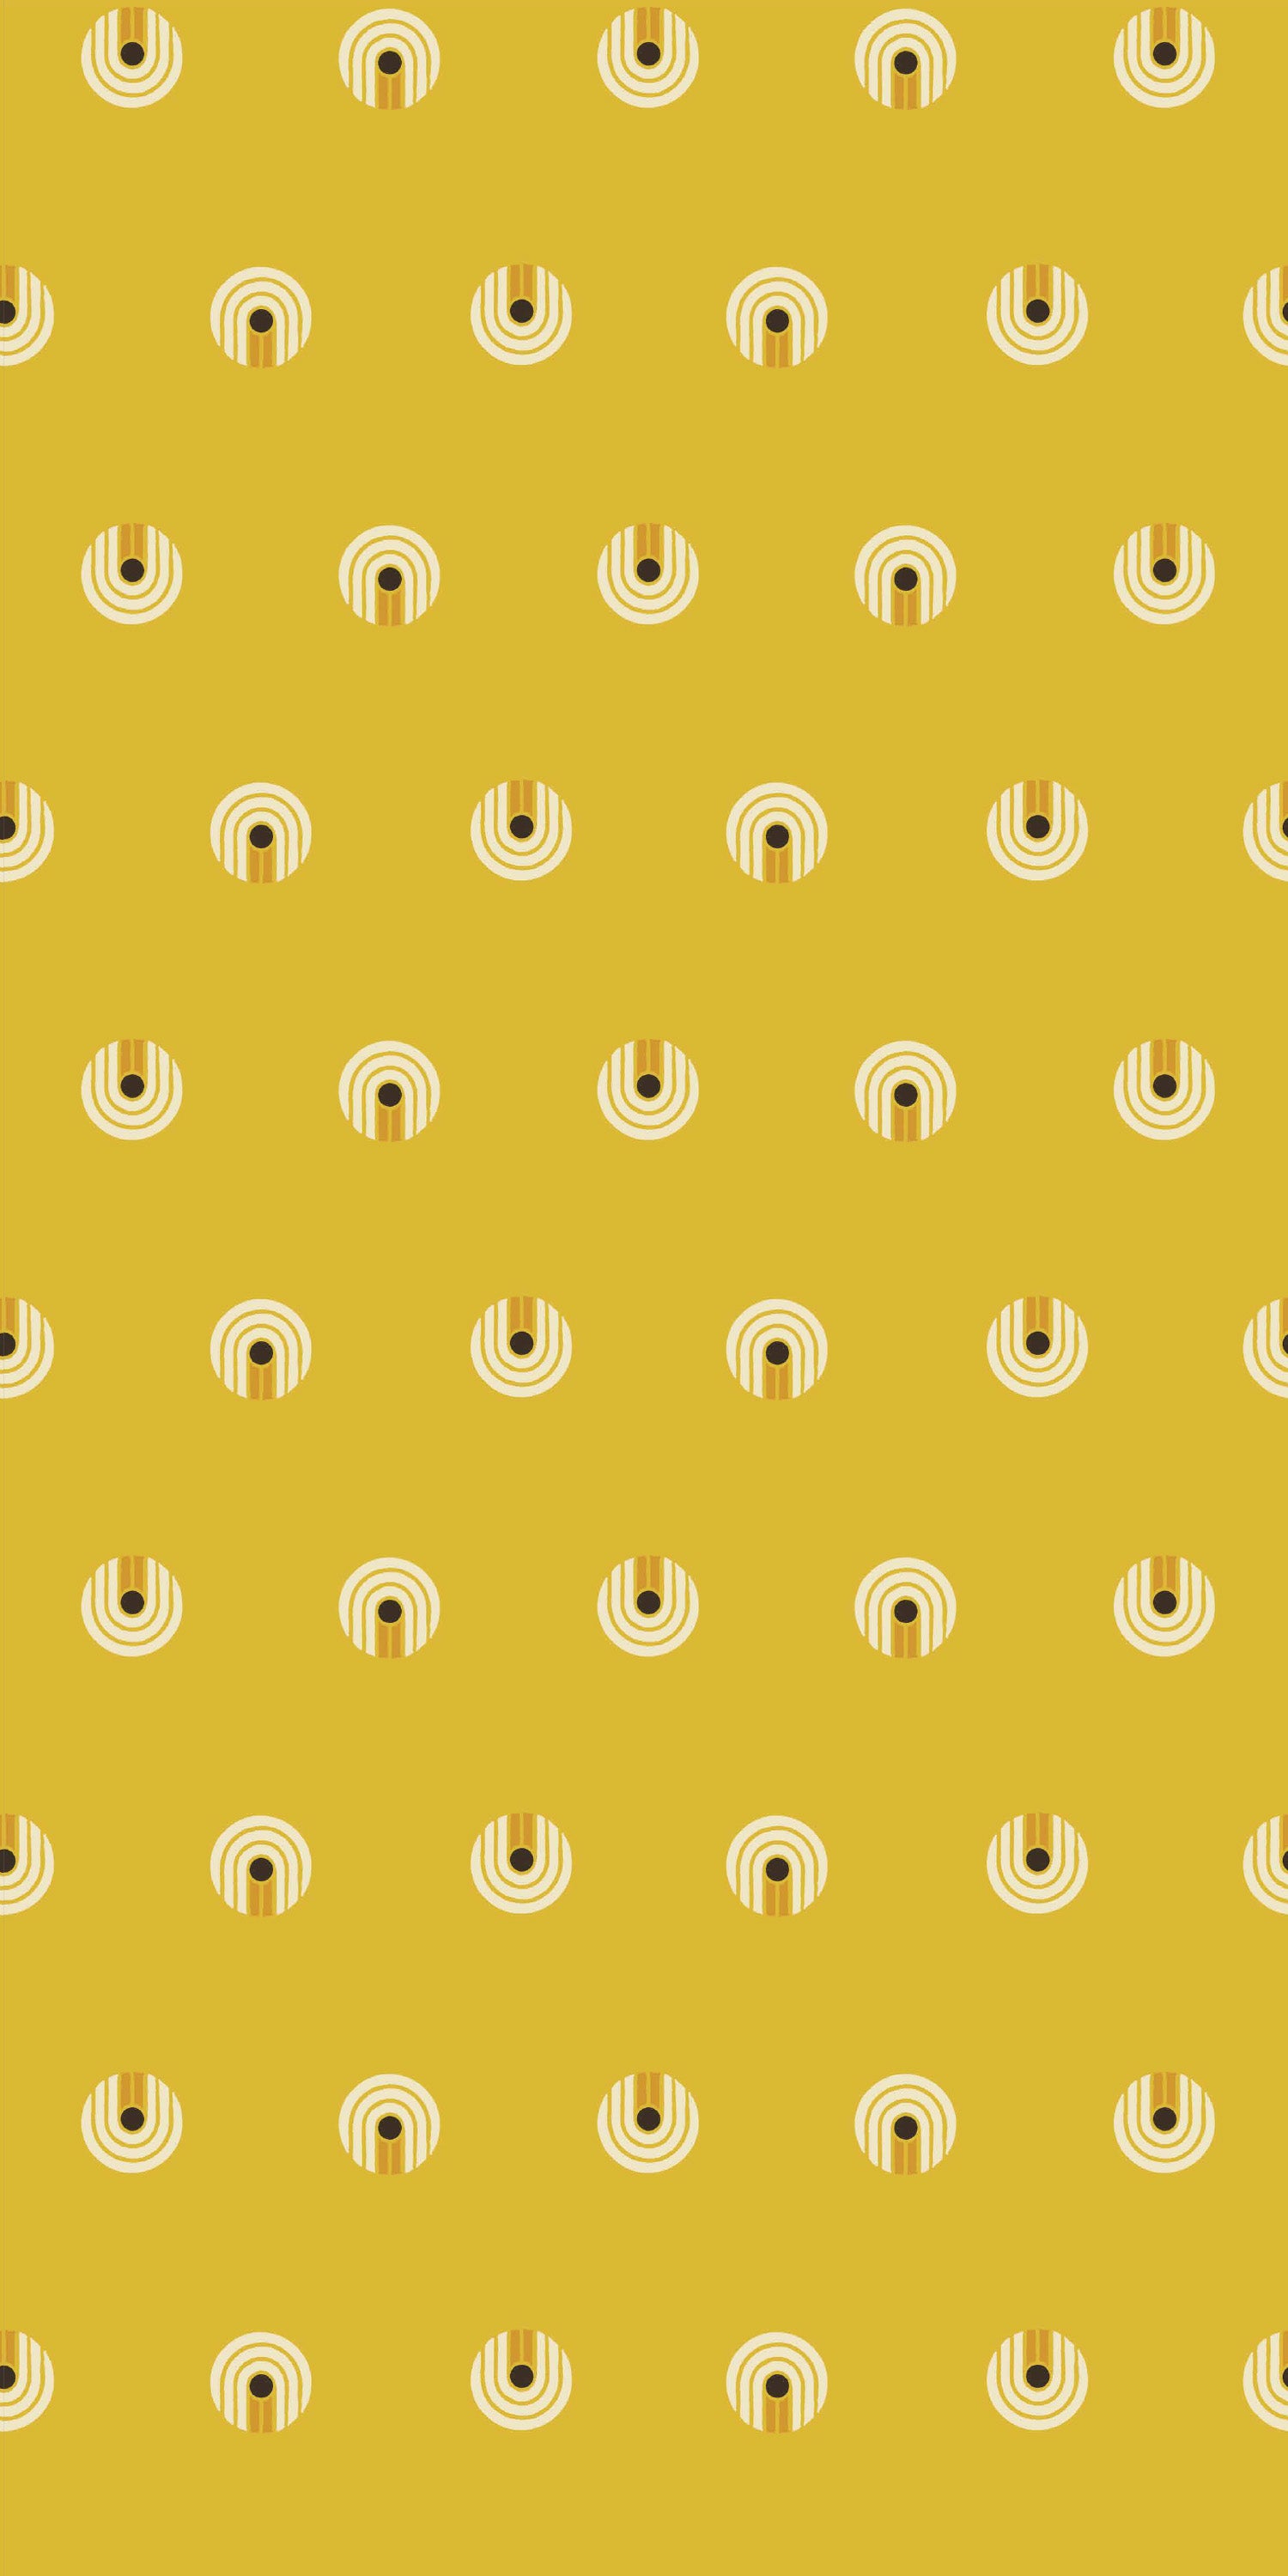 A pattern of yellow and brown shapes on a yellow background - Pastel yellow, yellow